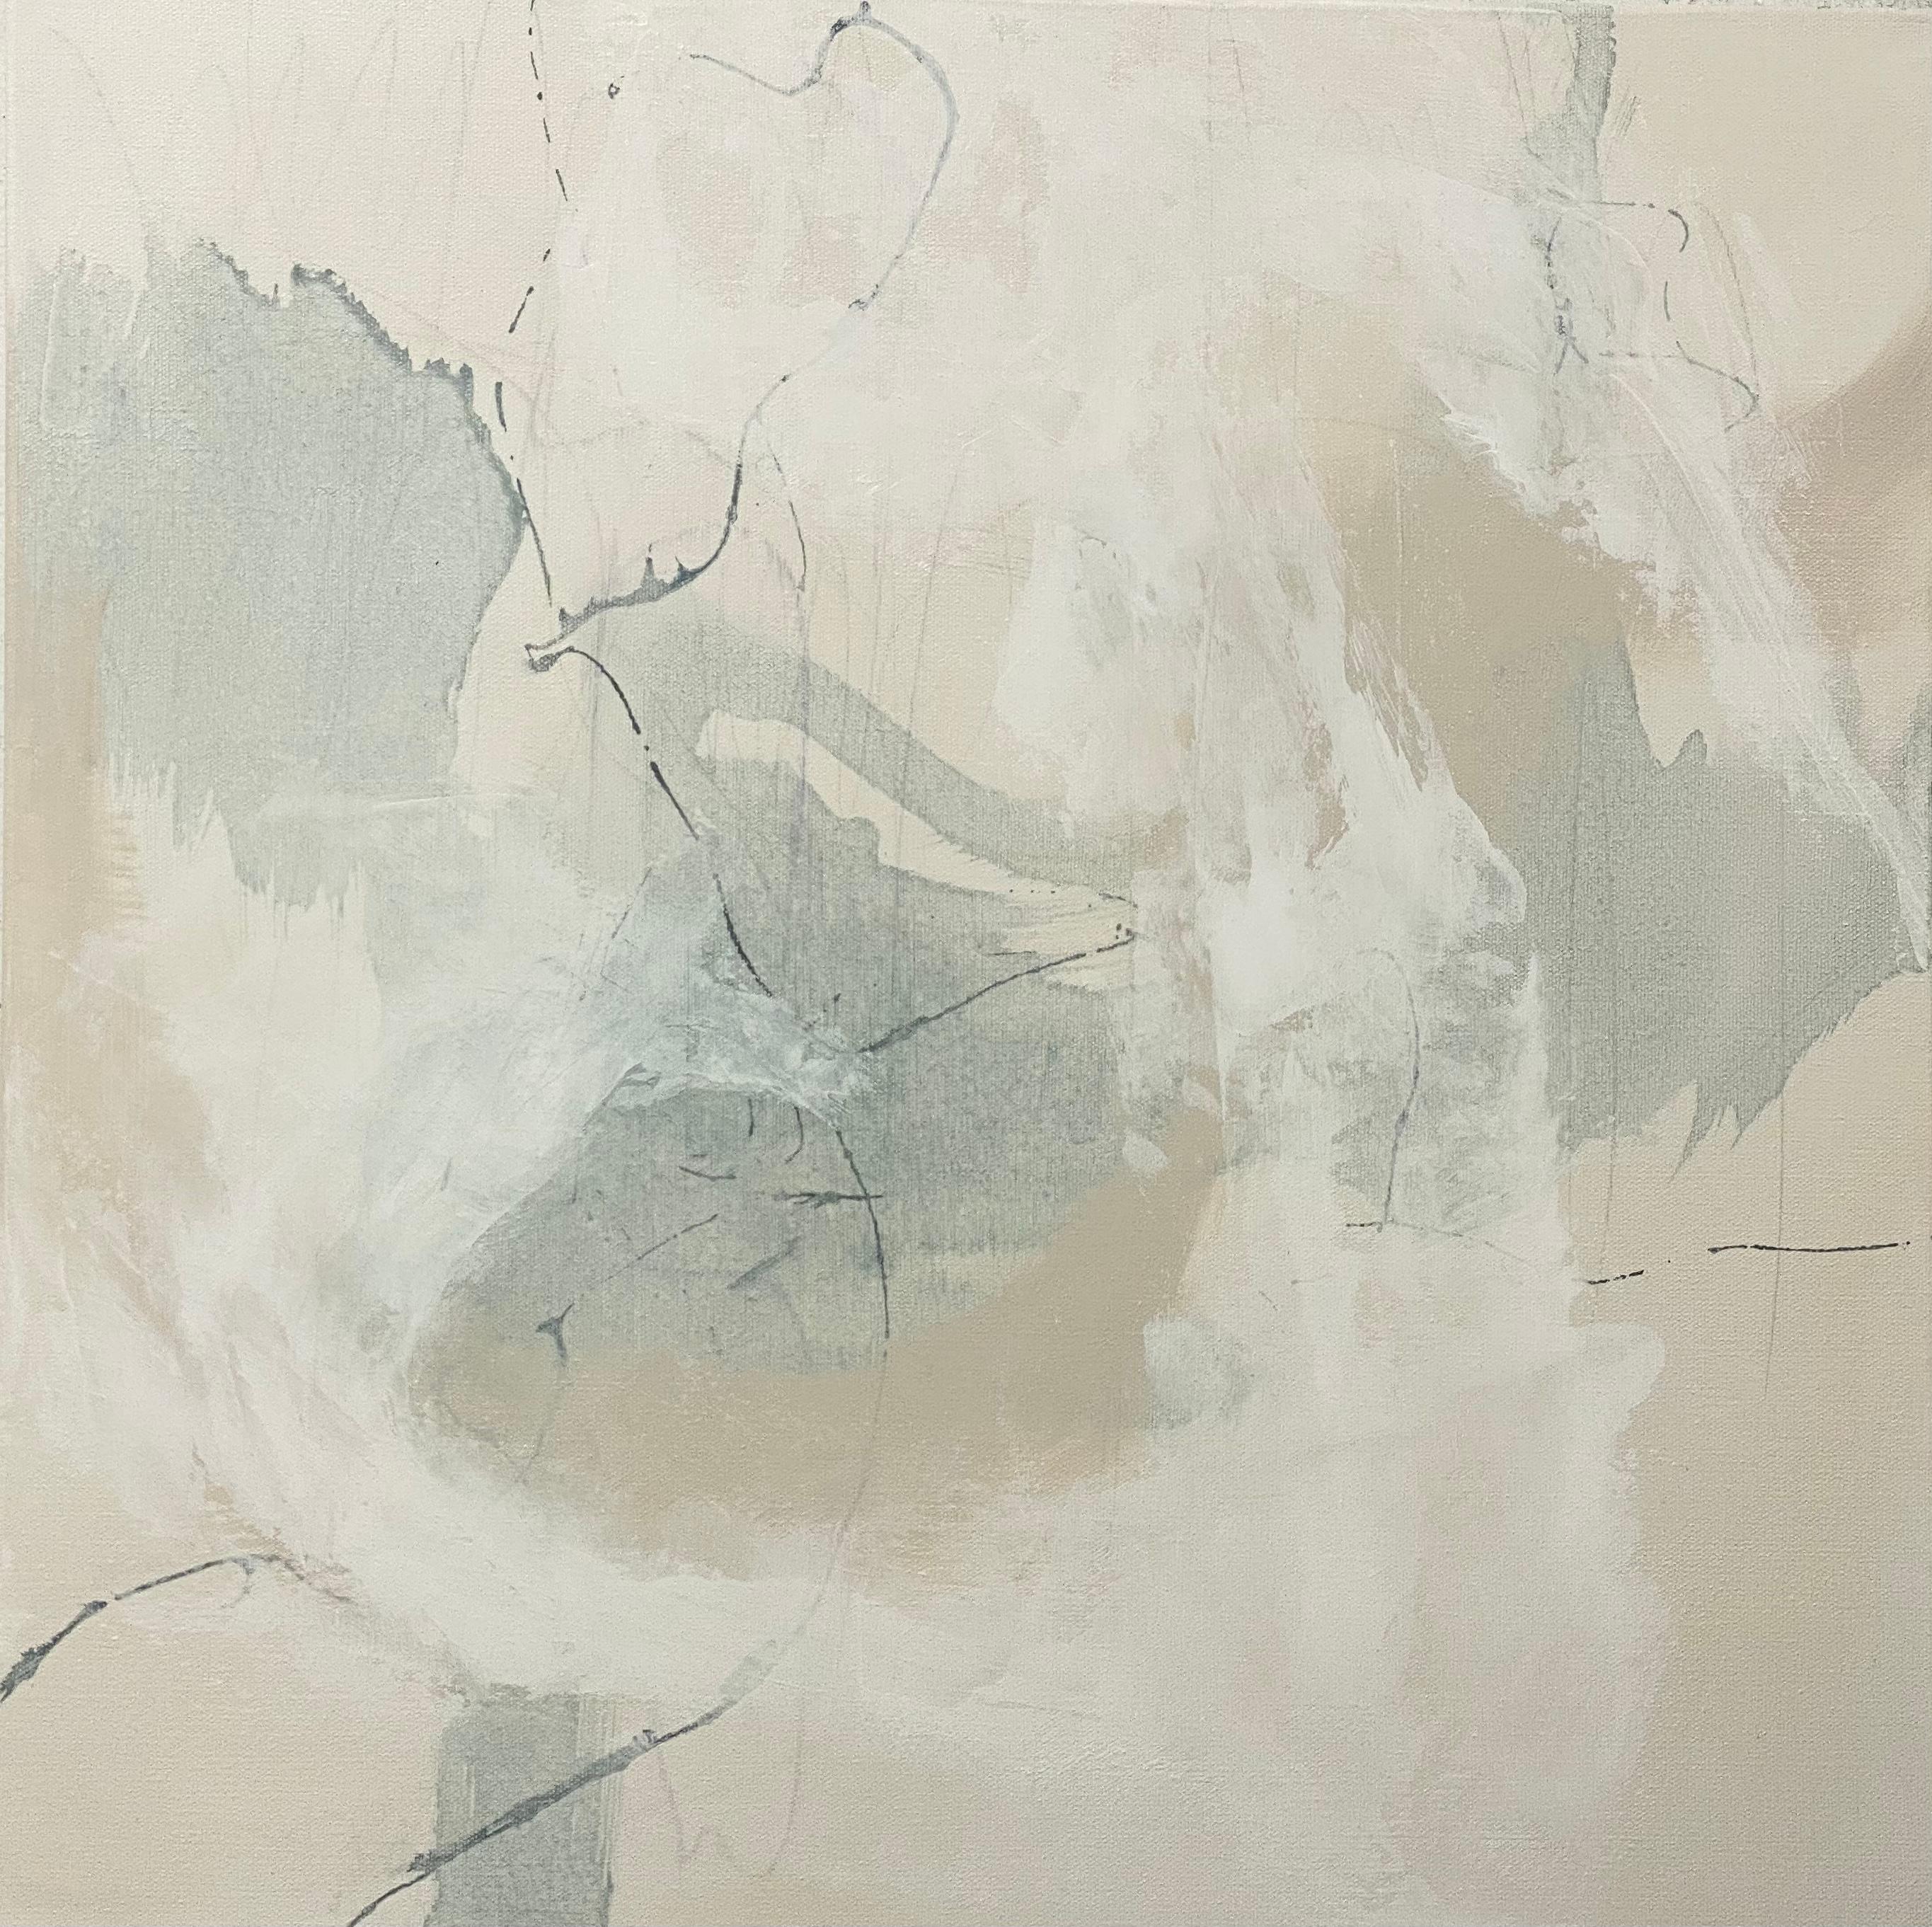 Articulate 6, contemporary abstract, neutral, seafoam, tan, white 24x24 inches